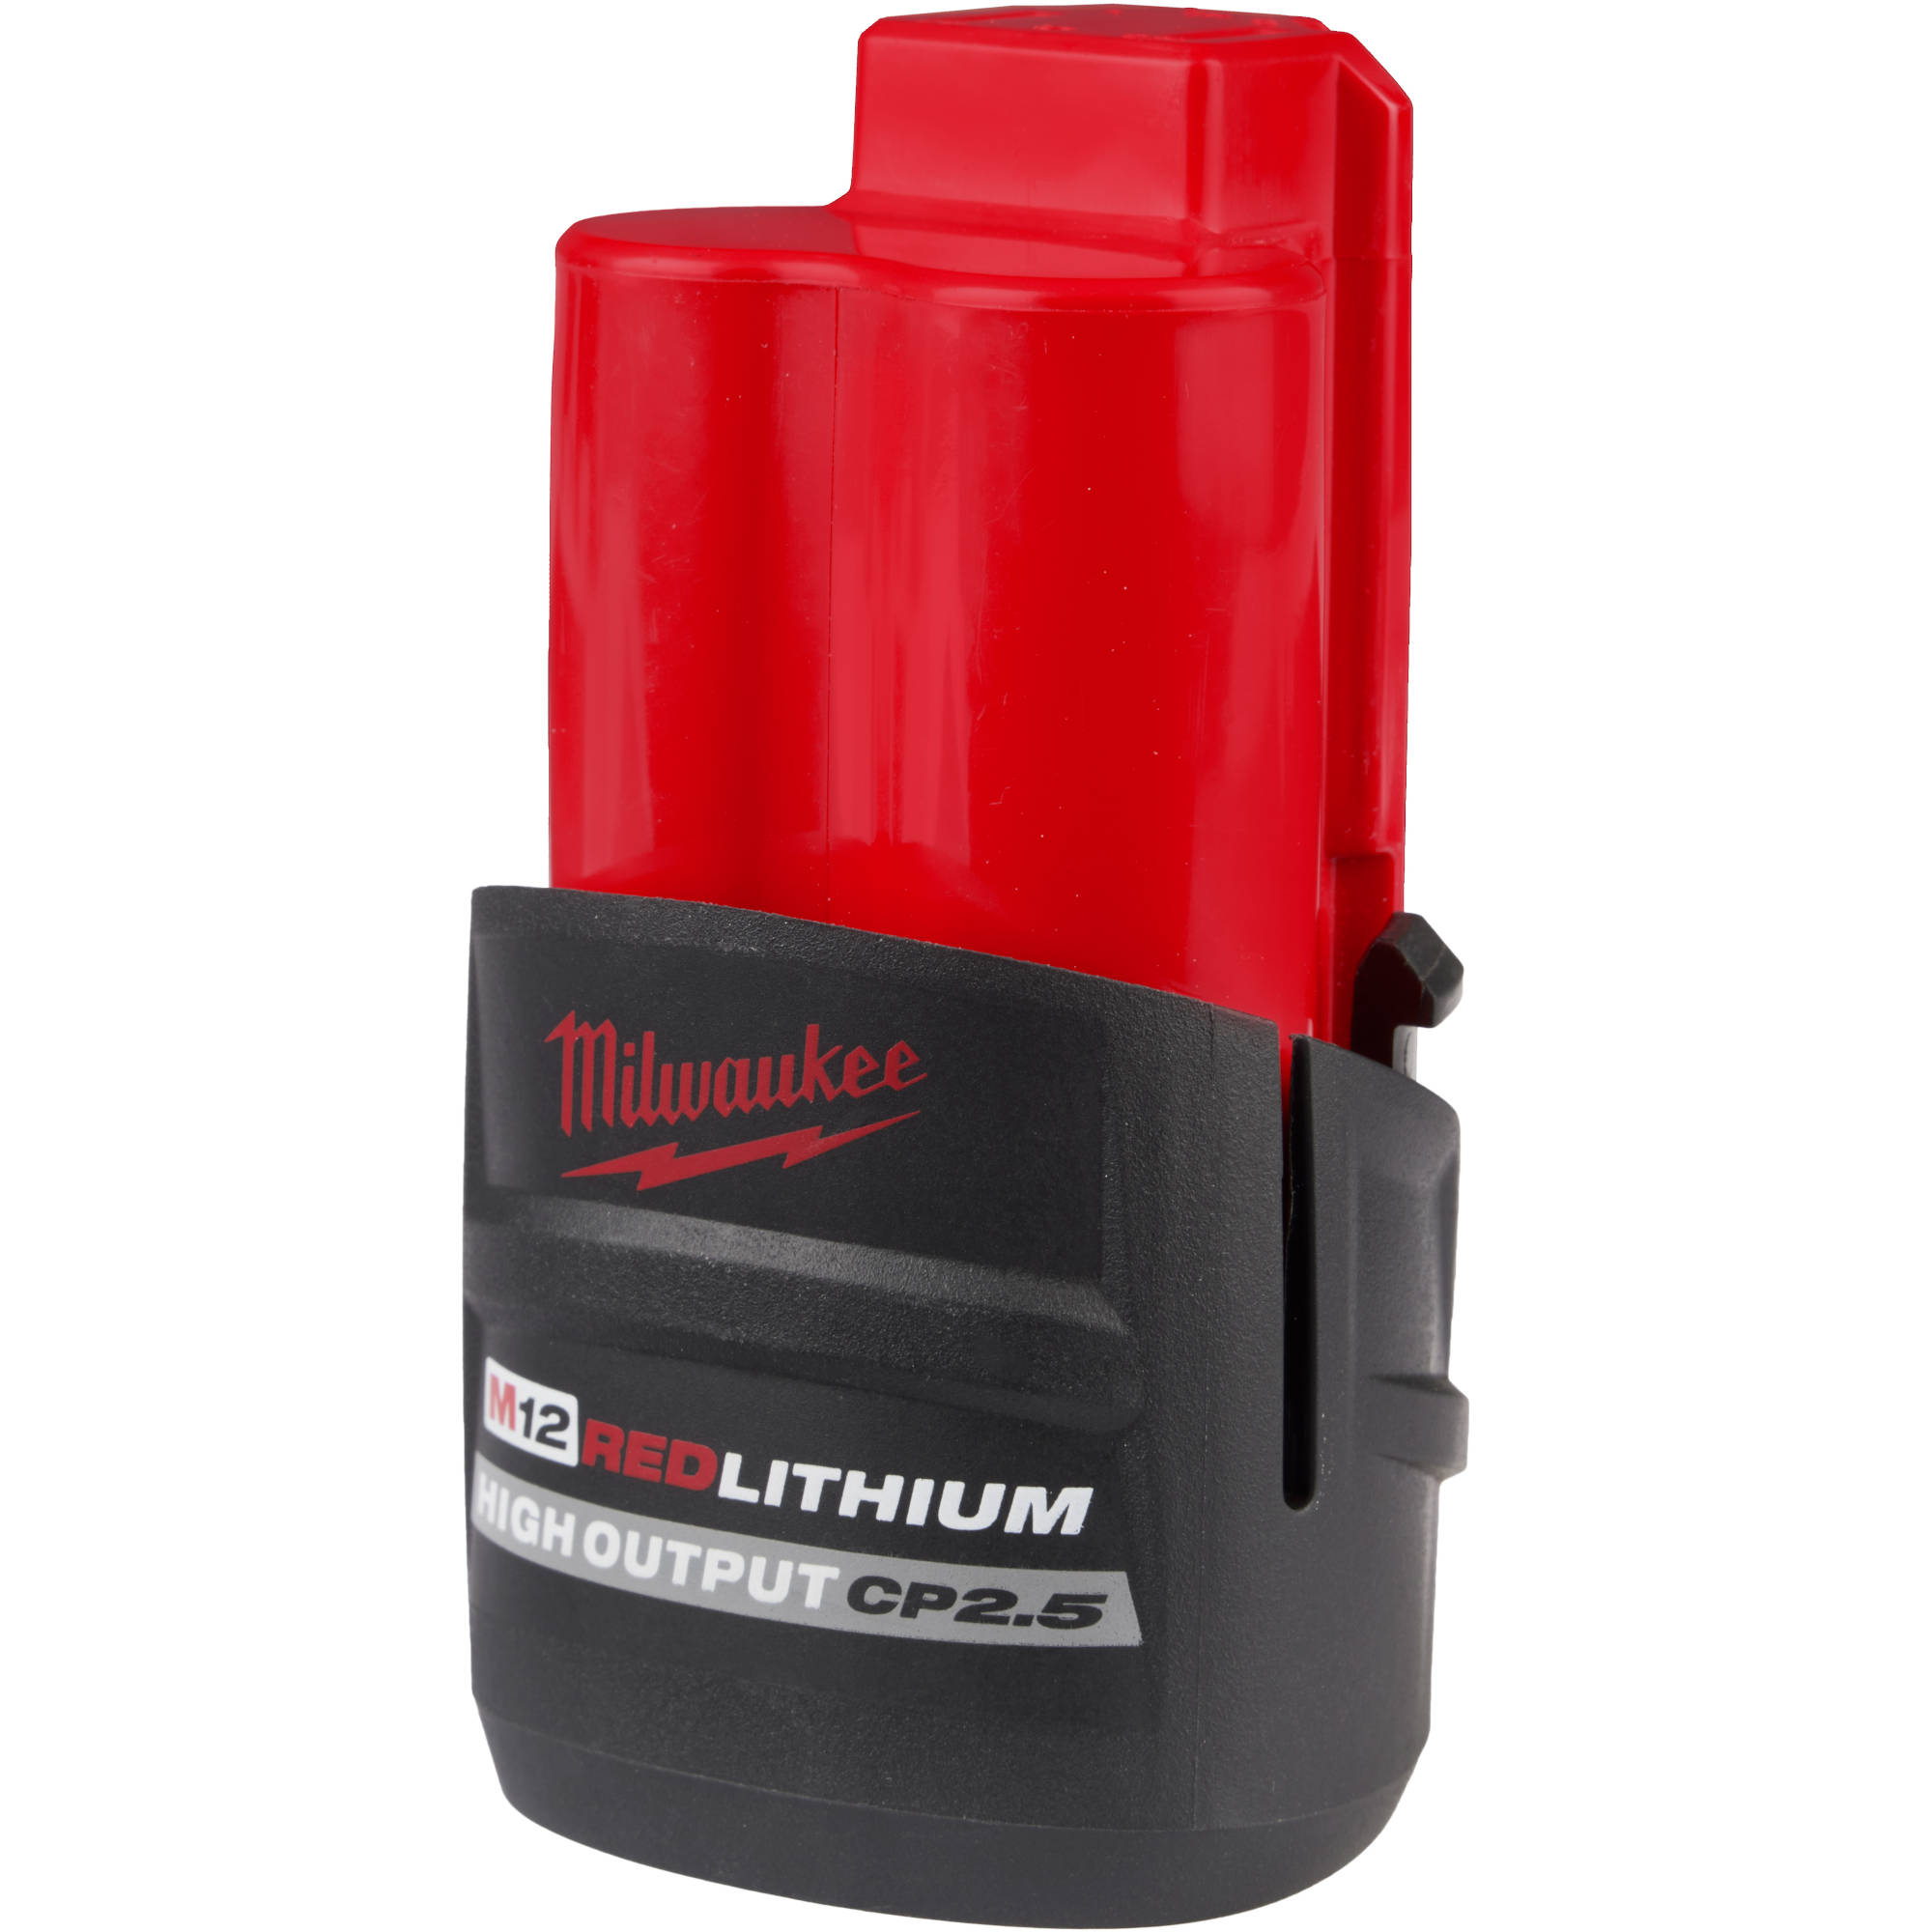 48-11-2425 Milwaukee M12 REDLITHIUM High Output CP2.5 Battery Pack 2